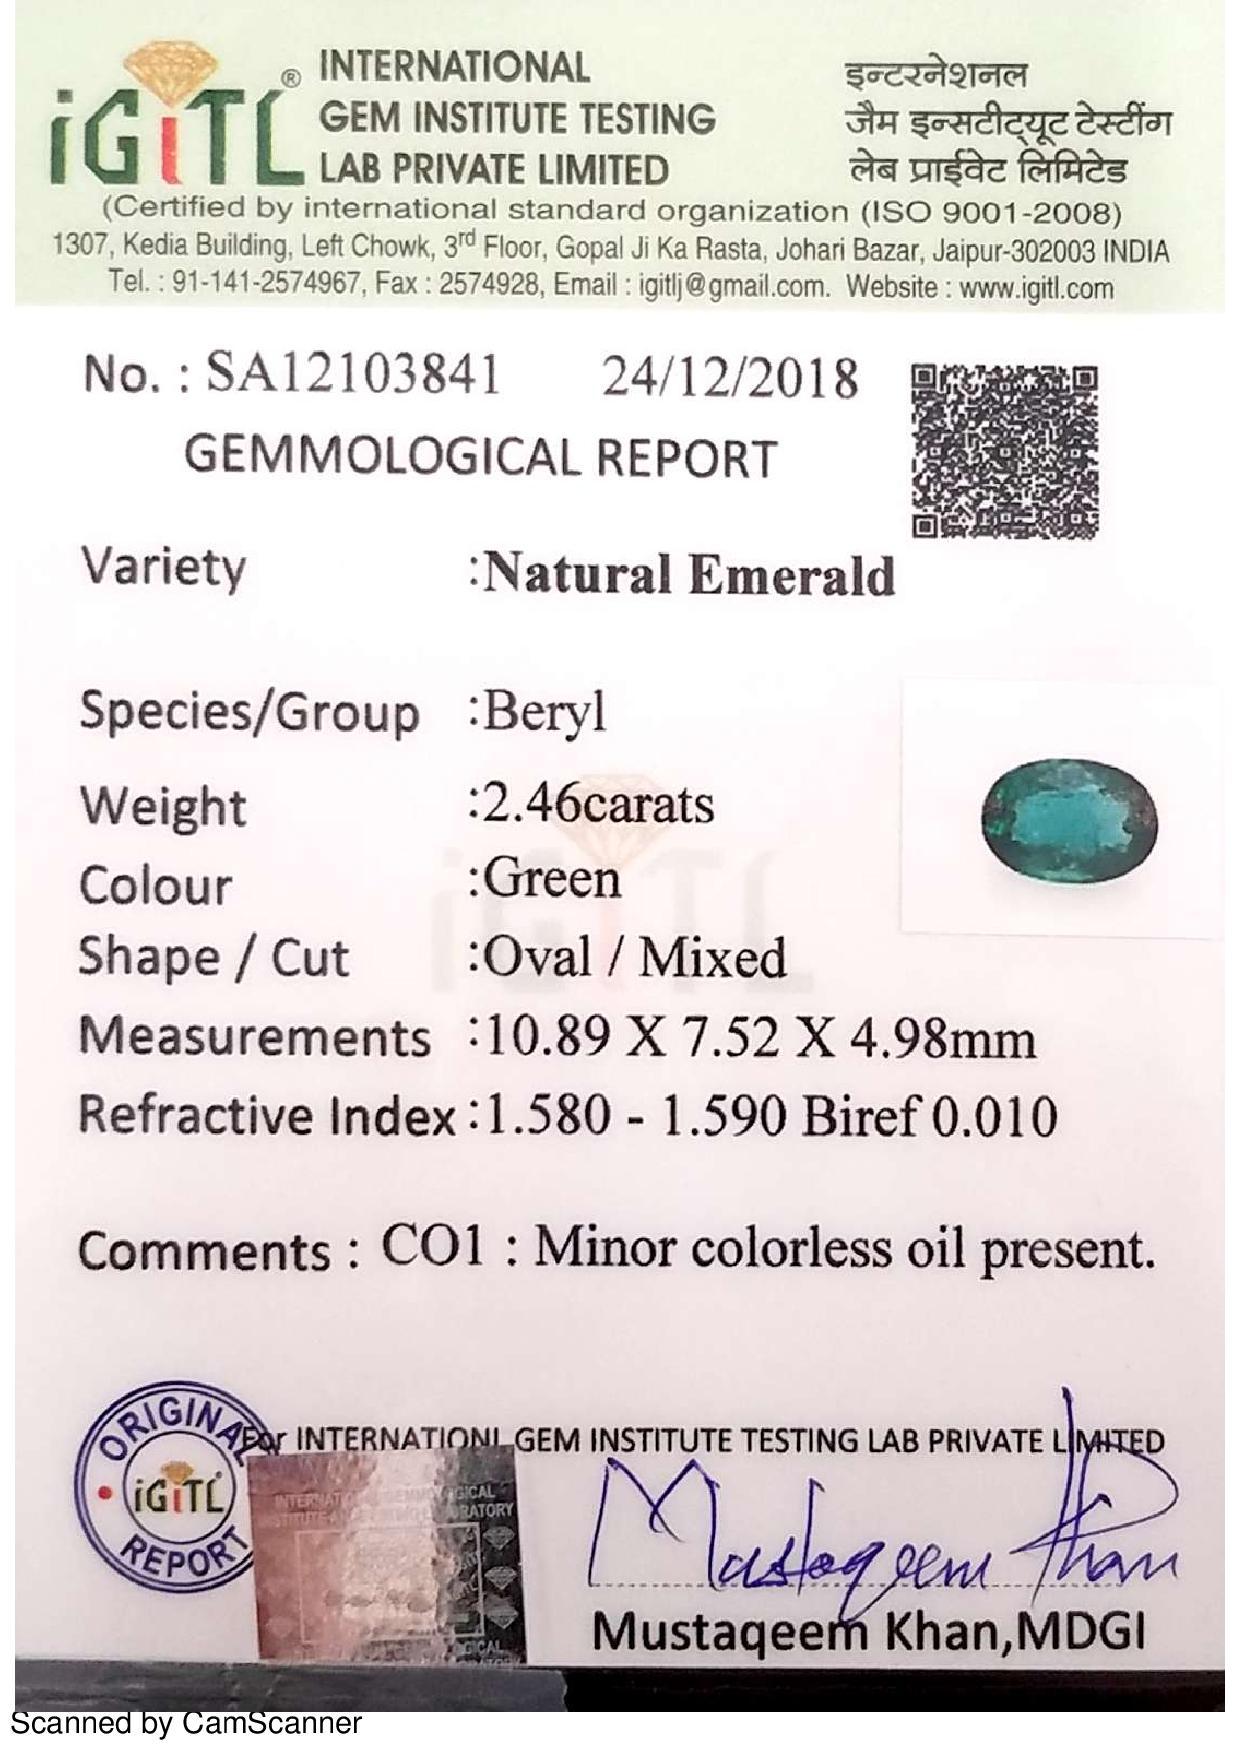 Oval Cut 2.46 Ct Weight Oval Shaped Green Color IGITL Certified Emerald Gemstone Pendant For Sale